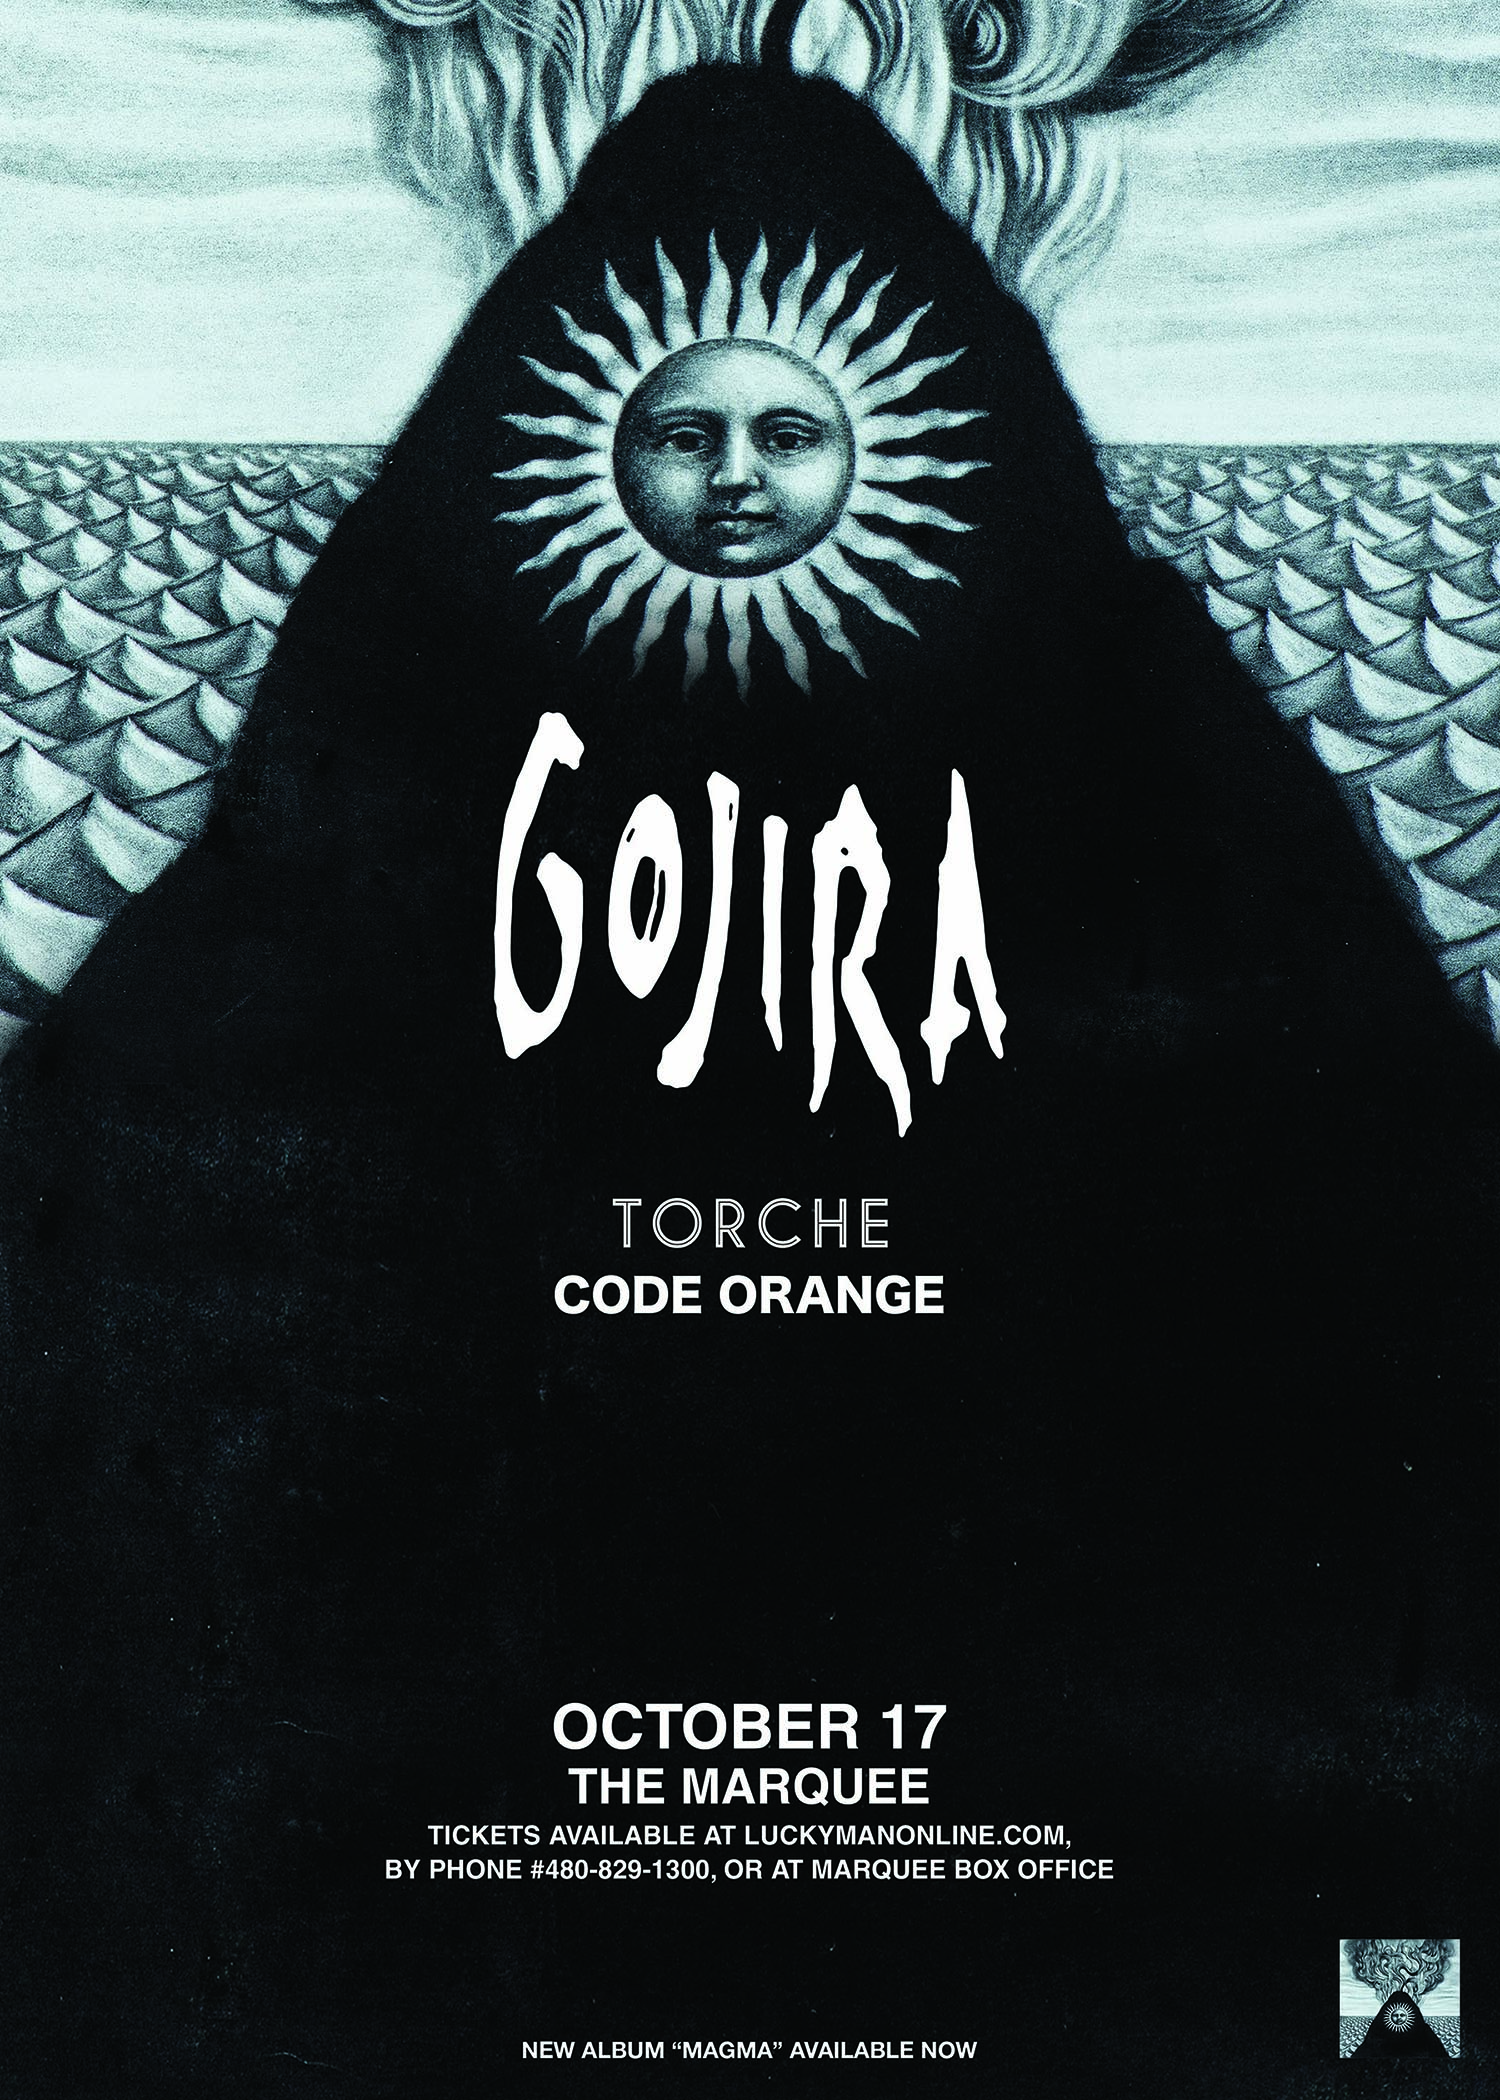 Win tickets to GOJIRA at Marquee Theatre